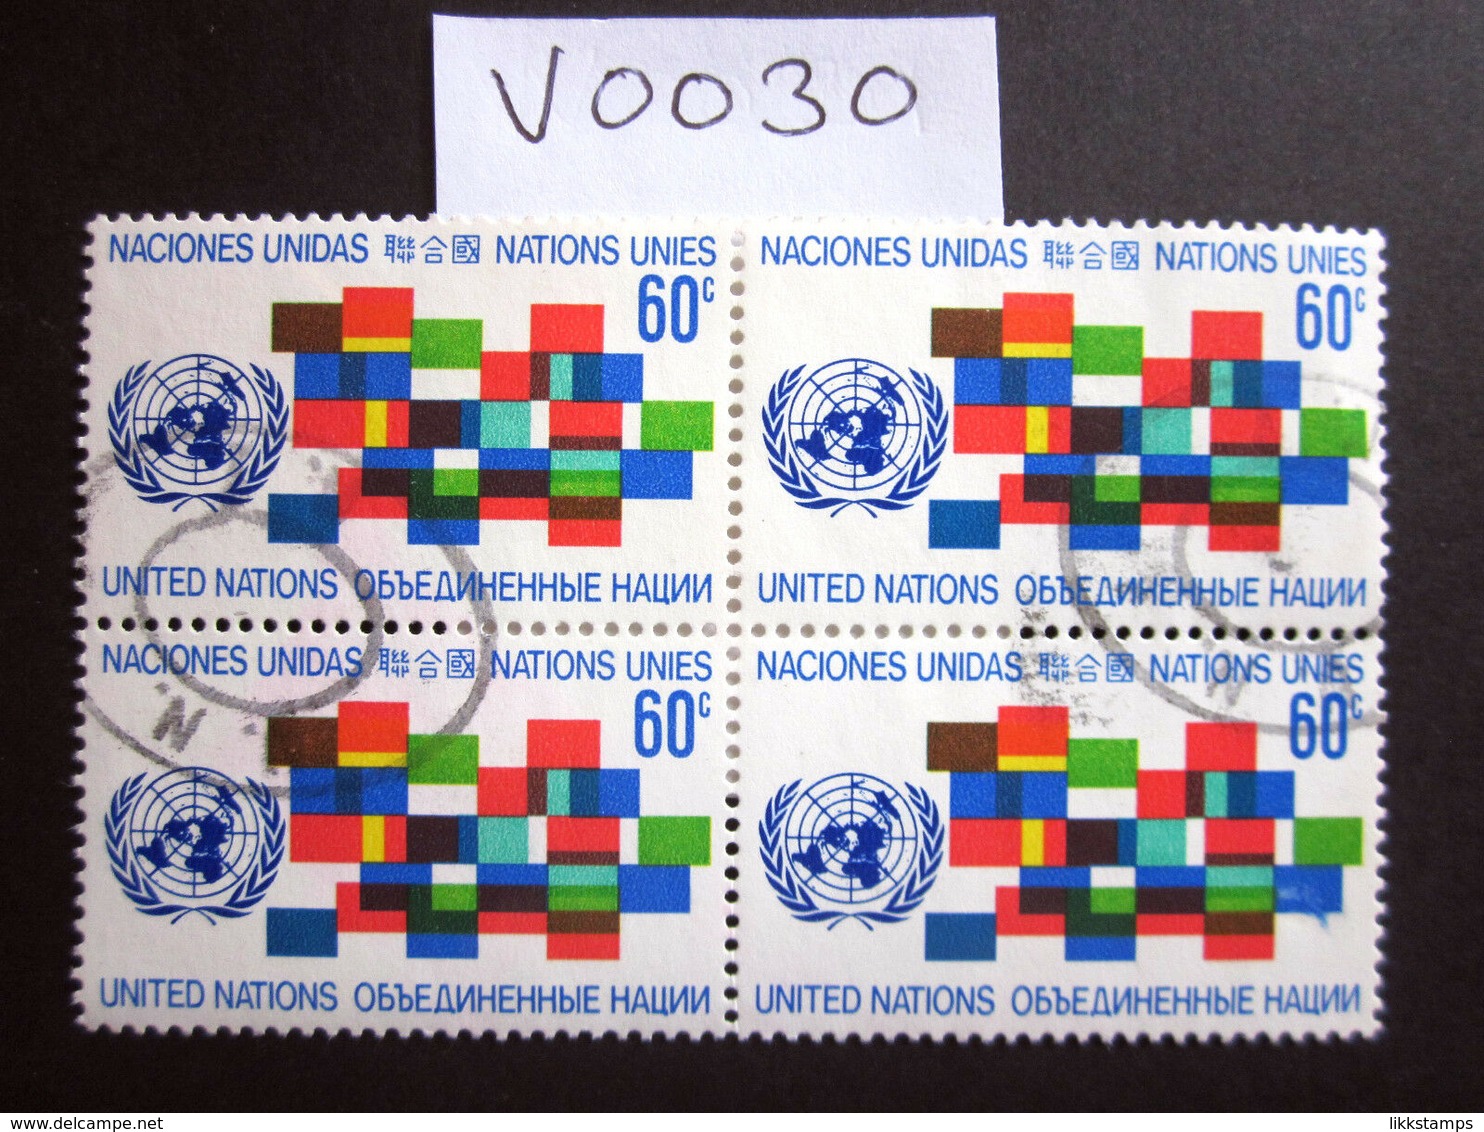 1971 A FINE USED BLOCK OF 4 "SG 223" PICTORIAL UNITED NATIONS USED STAMPS ( V0030 ) #00358 - Collections, Lots & Series